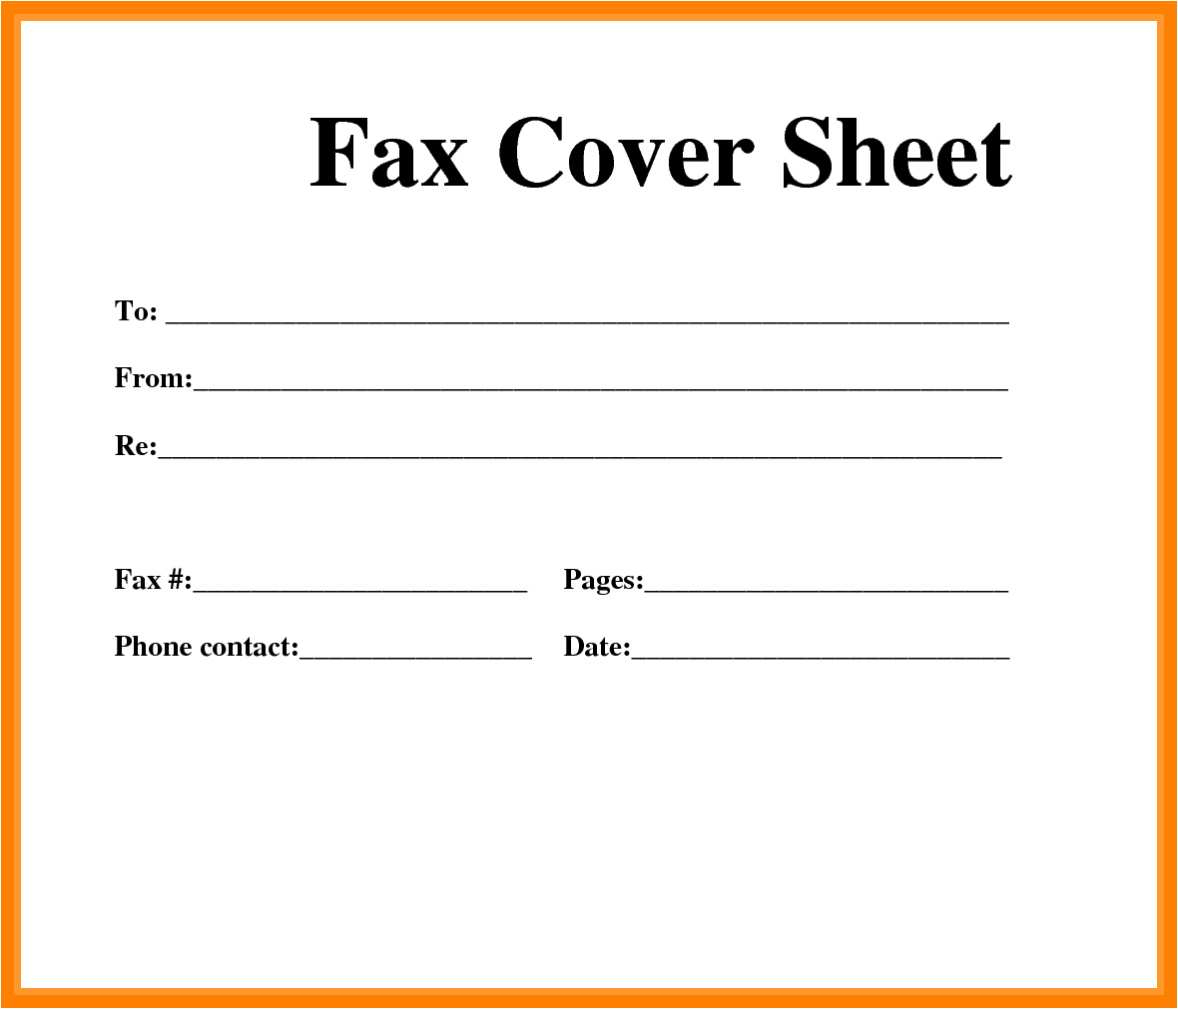 53 Fresh Fax Cover Sheet Template Word 2013 - All About Resume - Free Printable Fax Cover Page